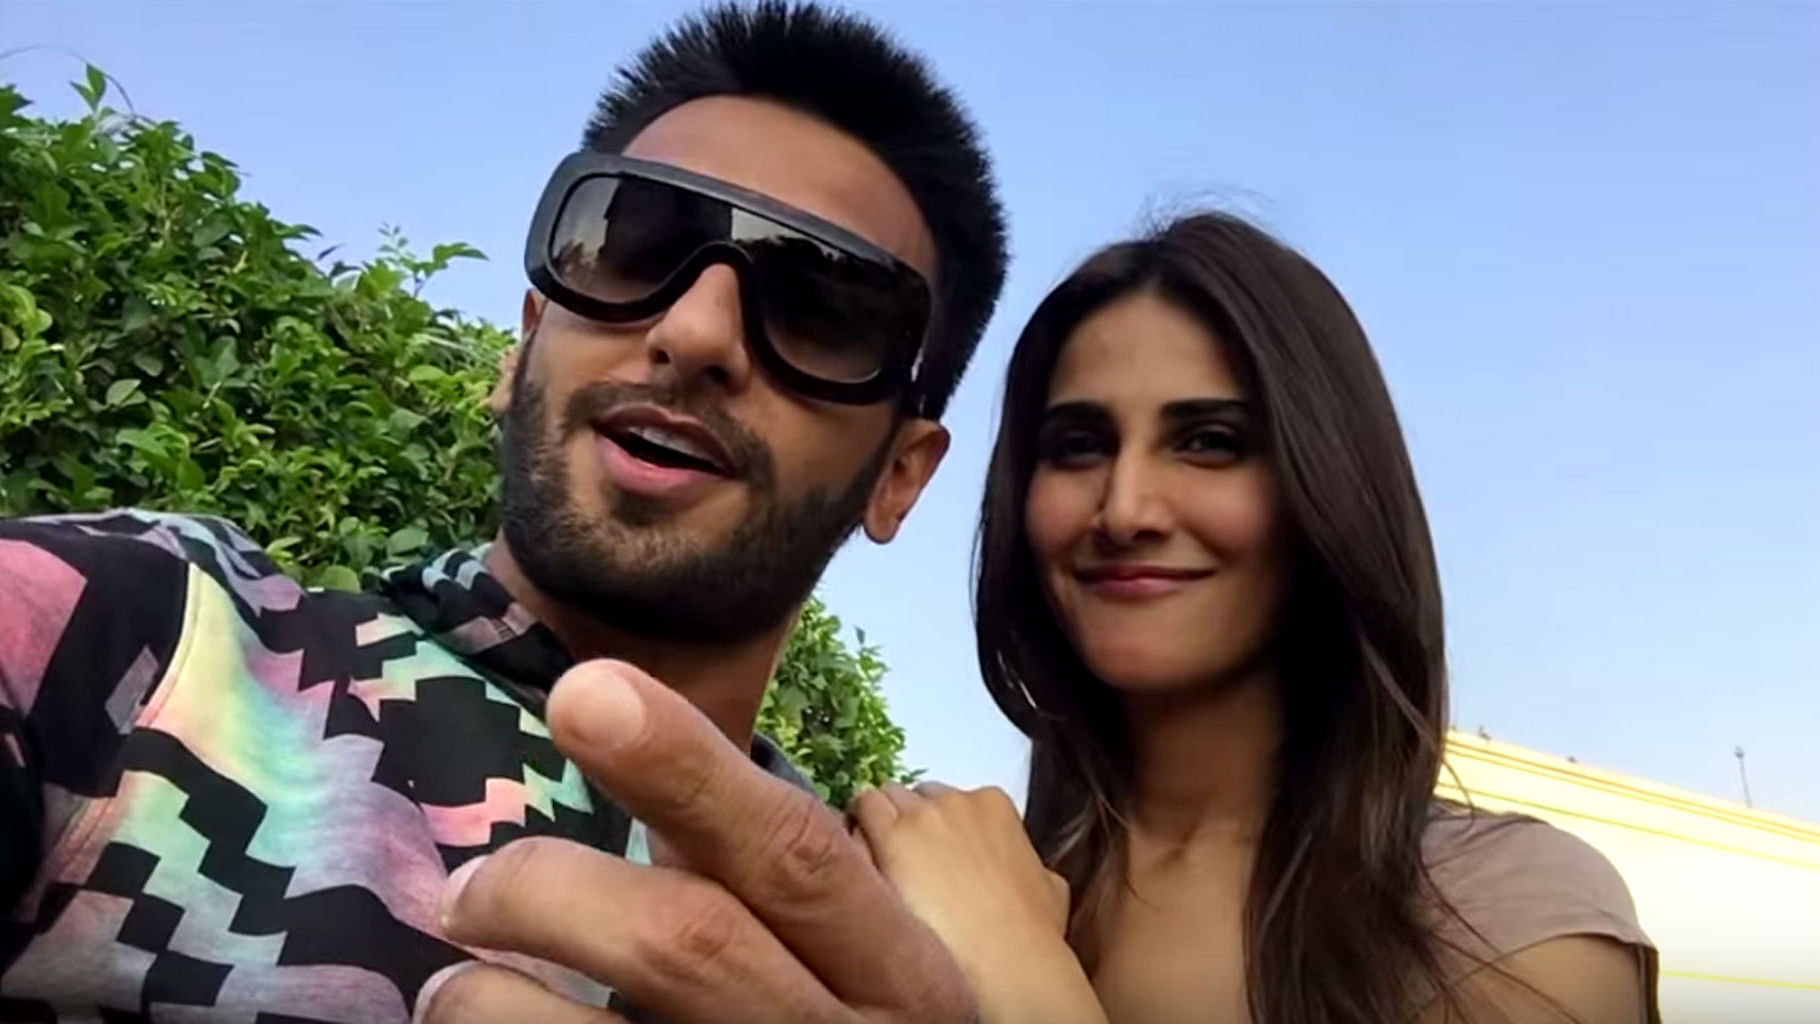 Vaani Kapoor and Ranveer Singh’s <i>Befikre</i> to hit screens on 9 December 2016. (Photo Courtesy:<a href="https://www.youtube.com/watch?v=-8Qv3WwoiWk&amp;feature=youtu.be"> YouTube/YRF</a>)